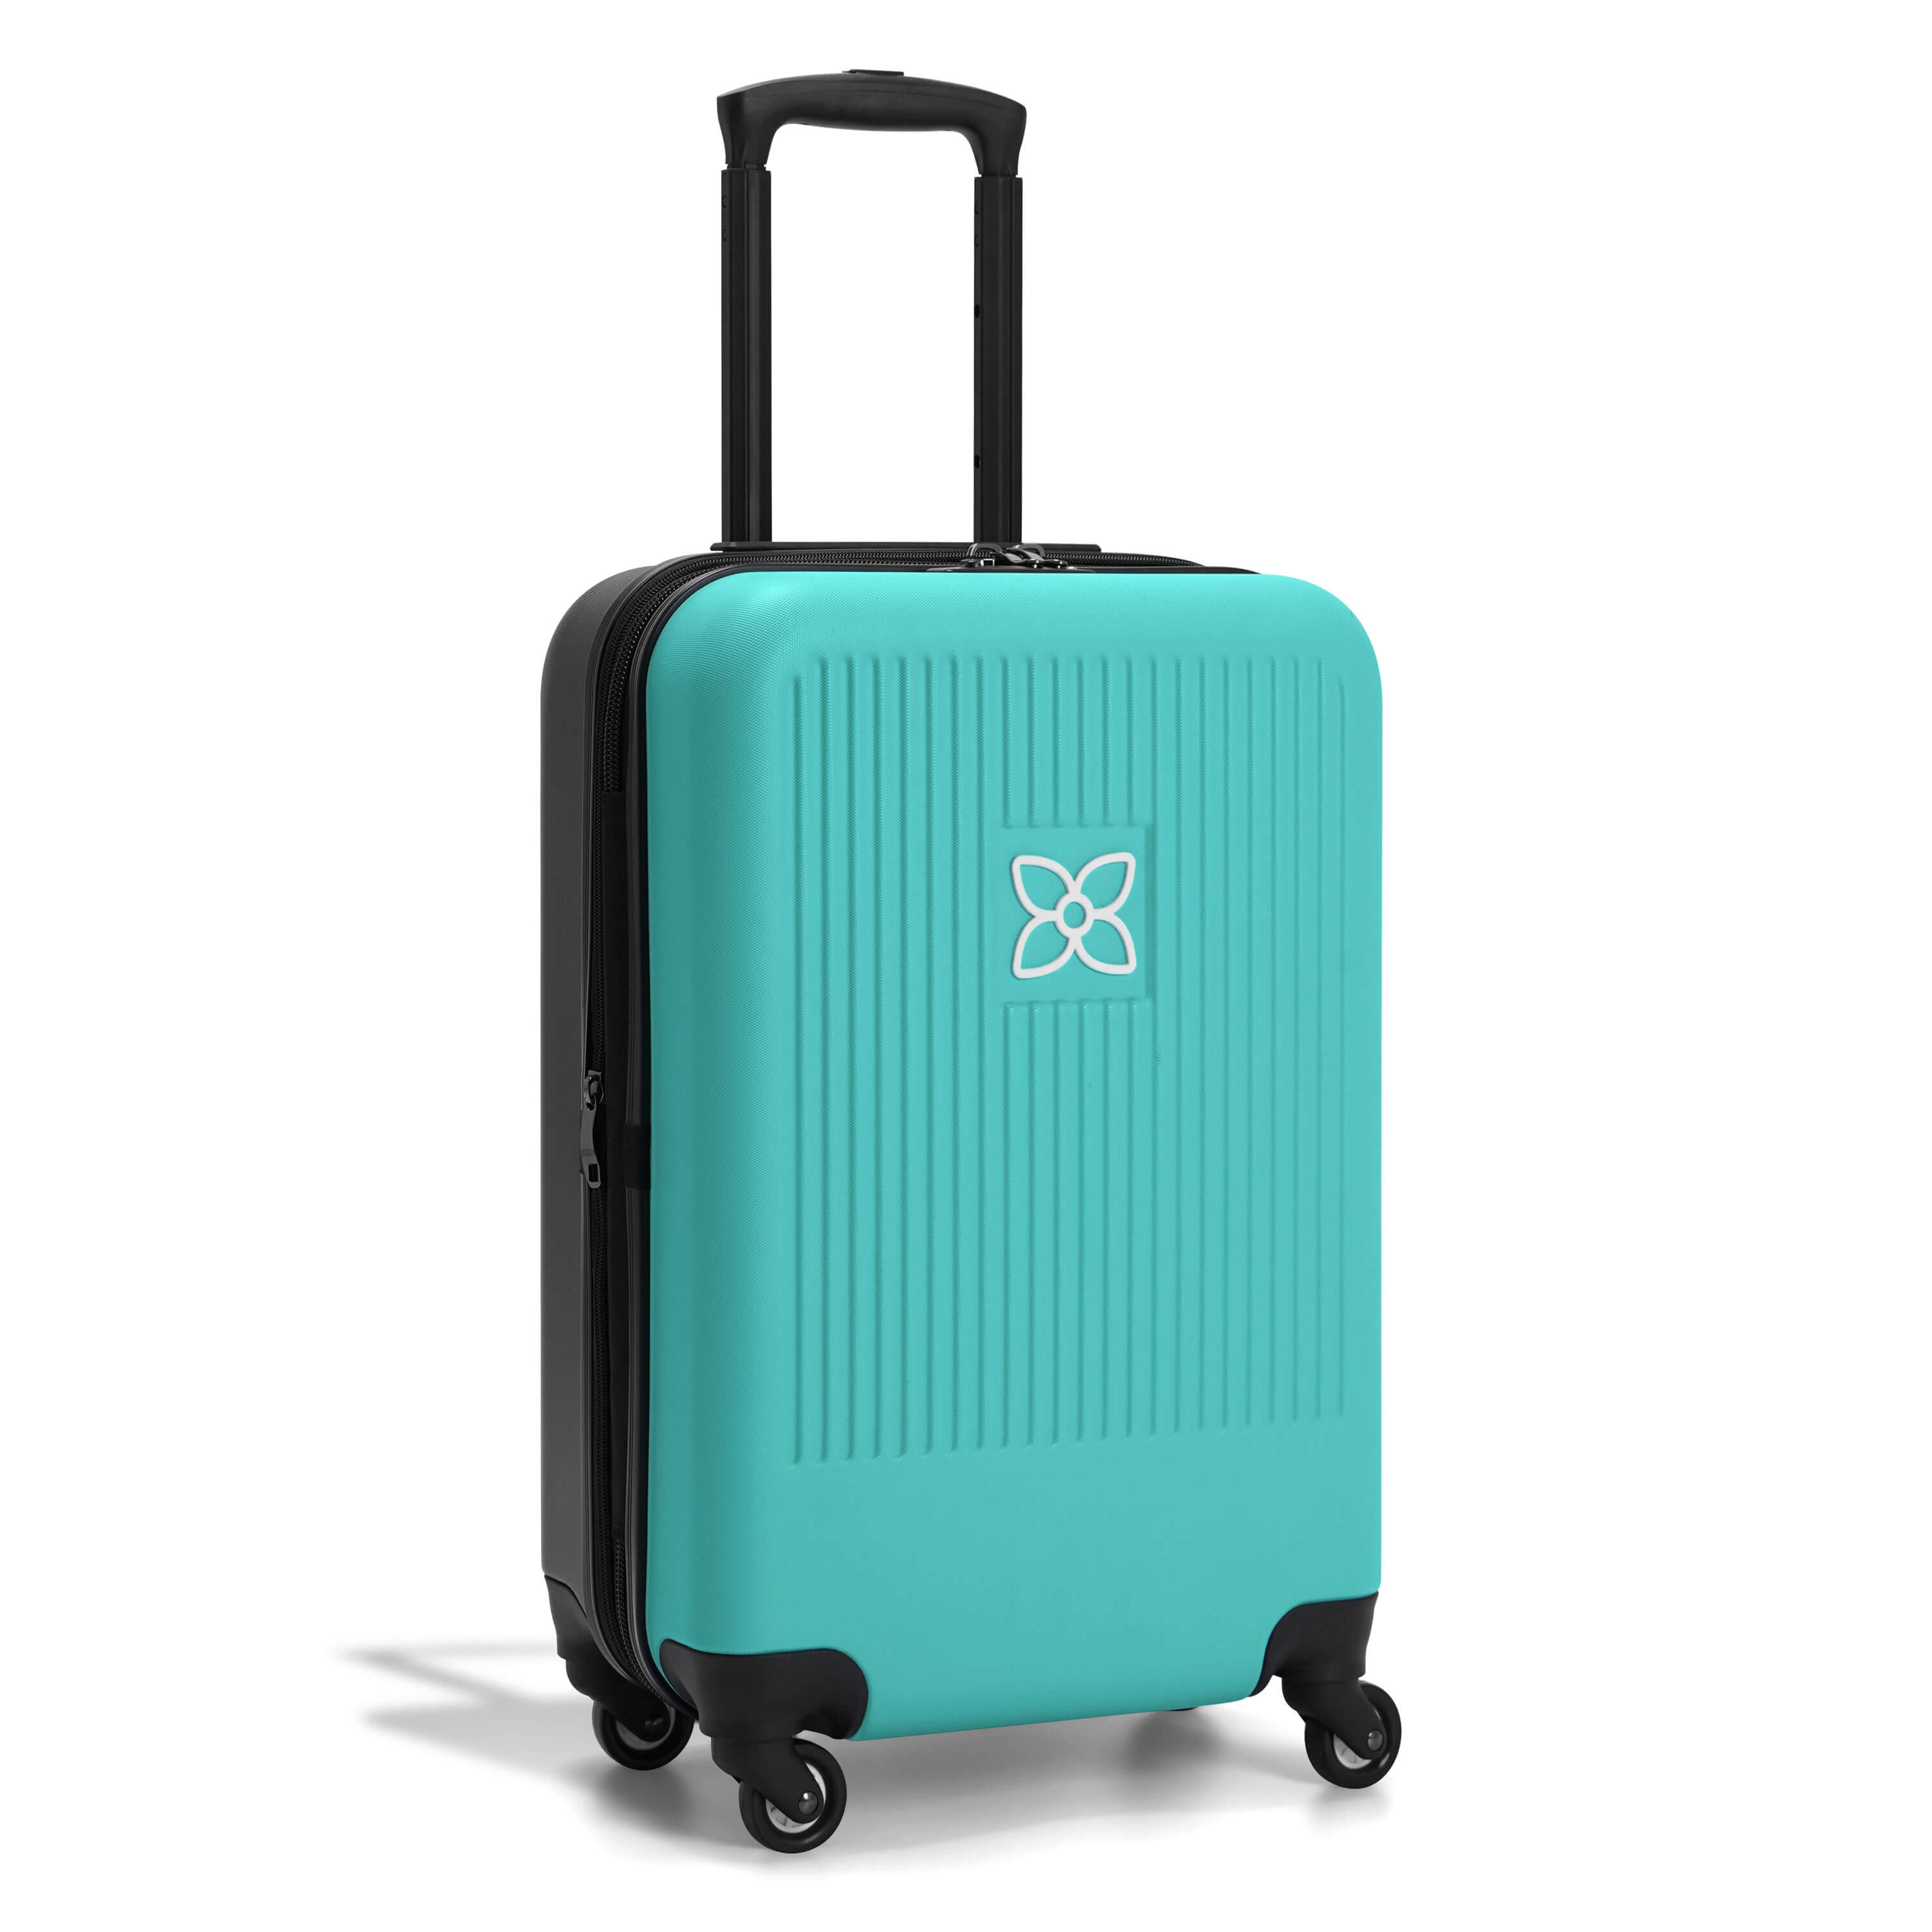 Angled front view of Sherpani hard-shell carry-on luggage, the Meridian in Caribe. Meridian features include a retractable luggage handle, uncrushable exterior, TSA-approved locking zippers and four 36-degree spinner wheels. The Caribe colorway is two-toned with the front of the suitcase in turquoise blue and the back in classic black. #color_caribe